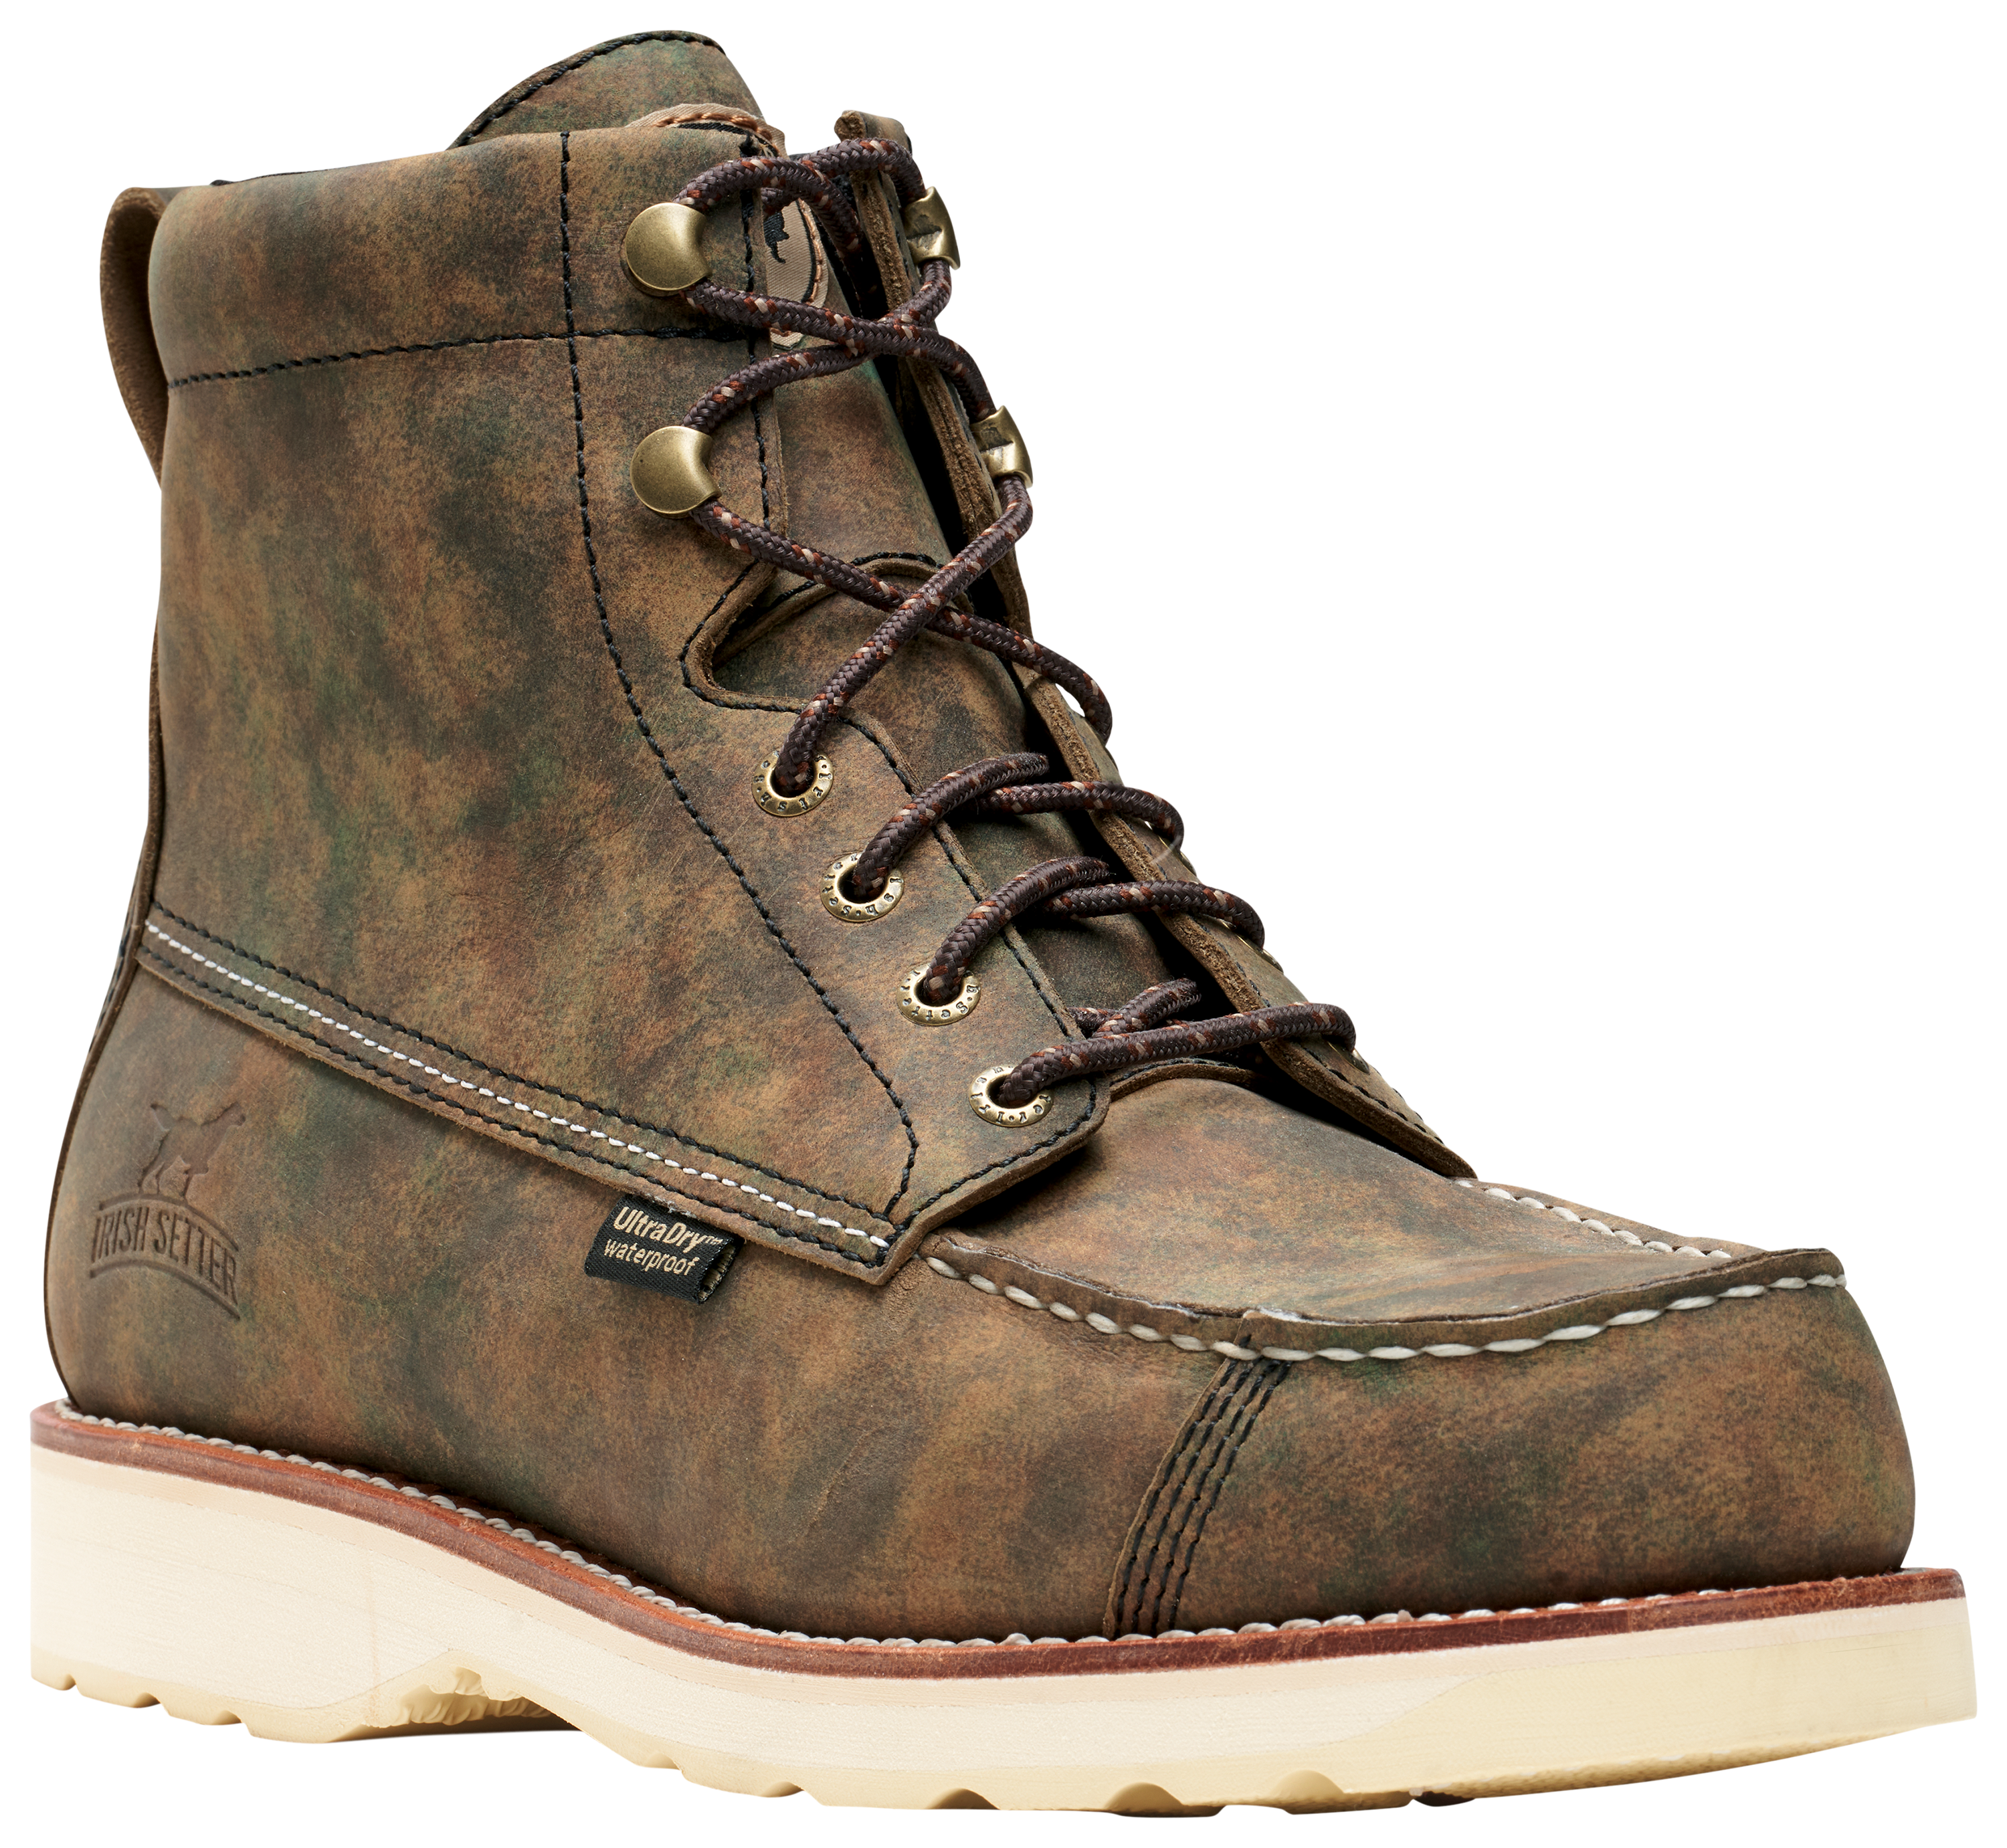 Irish Setter Wingshooter 7 Waterproof Hunting Boots for Men - Earth Camo - 9.5W